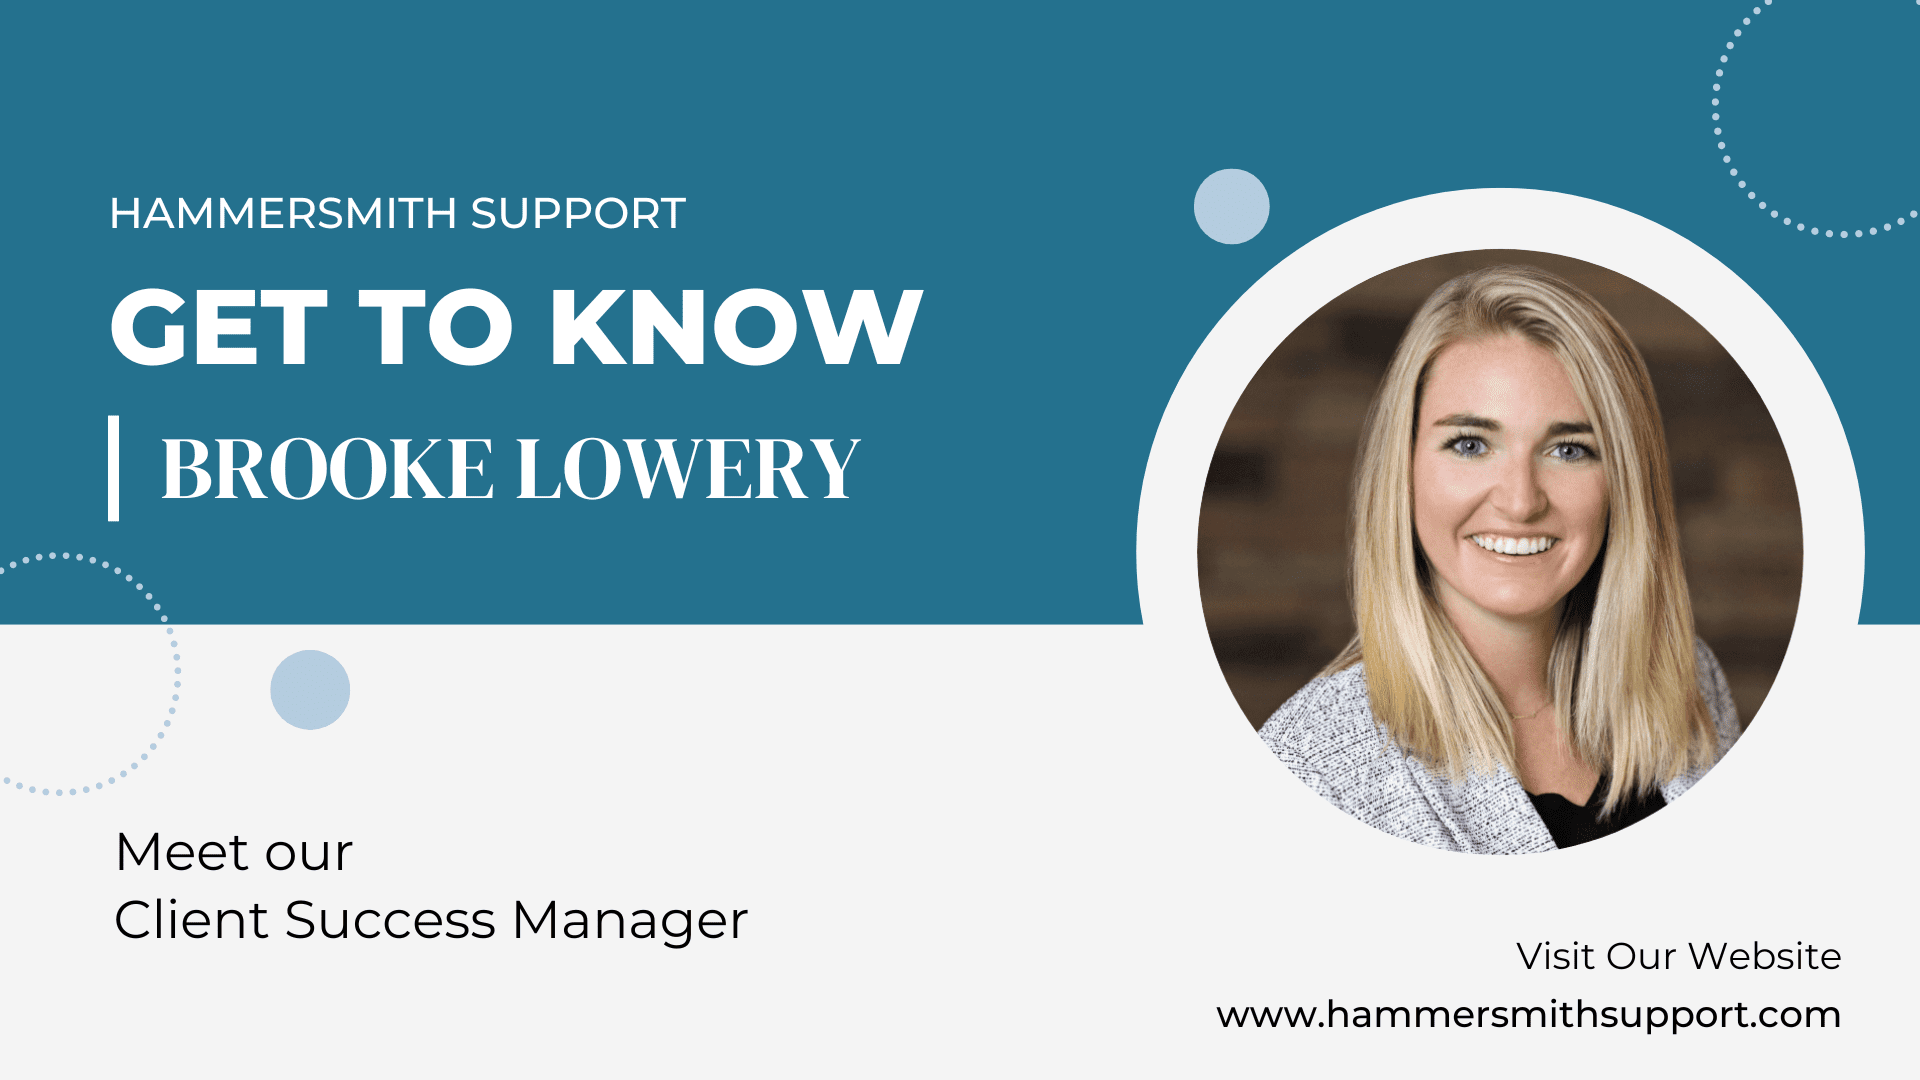 Get to know Brooke, Lowery, Nashville Client Success Manager